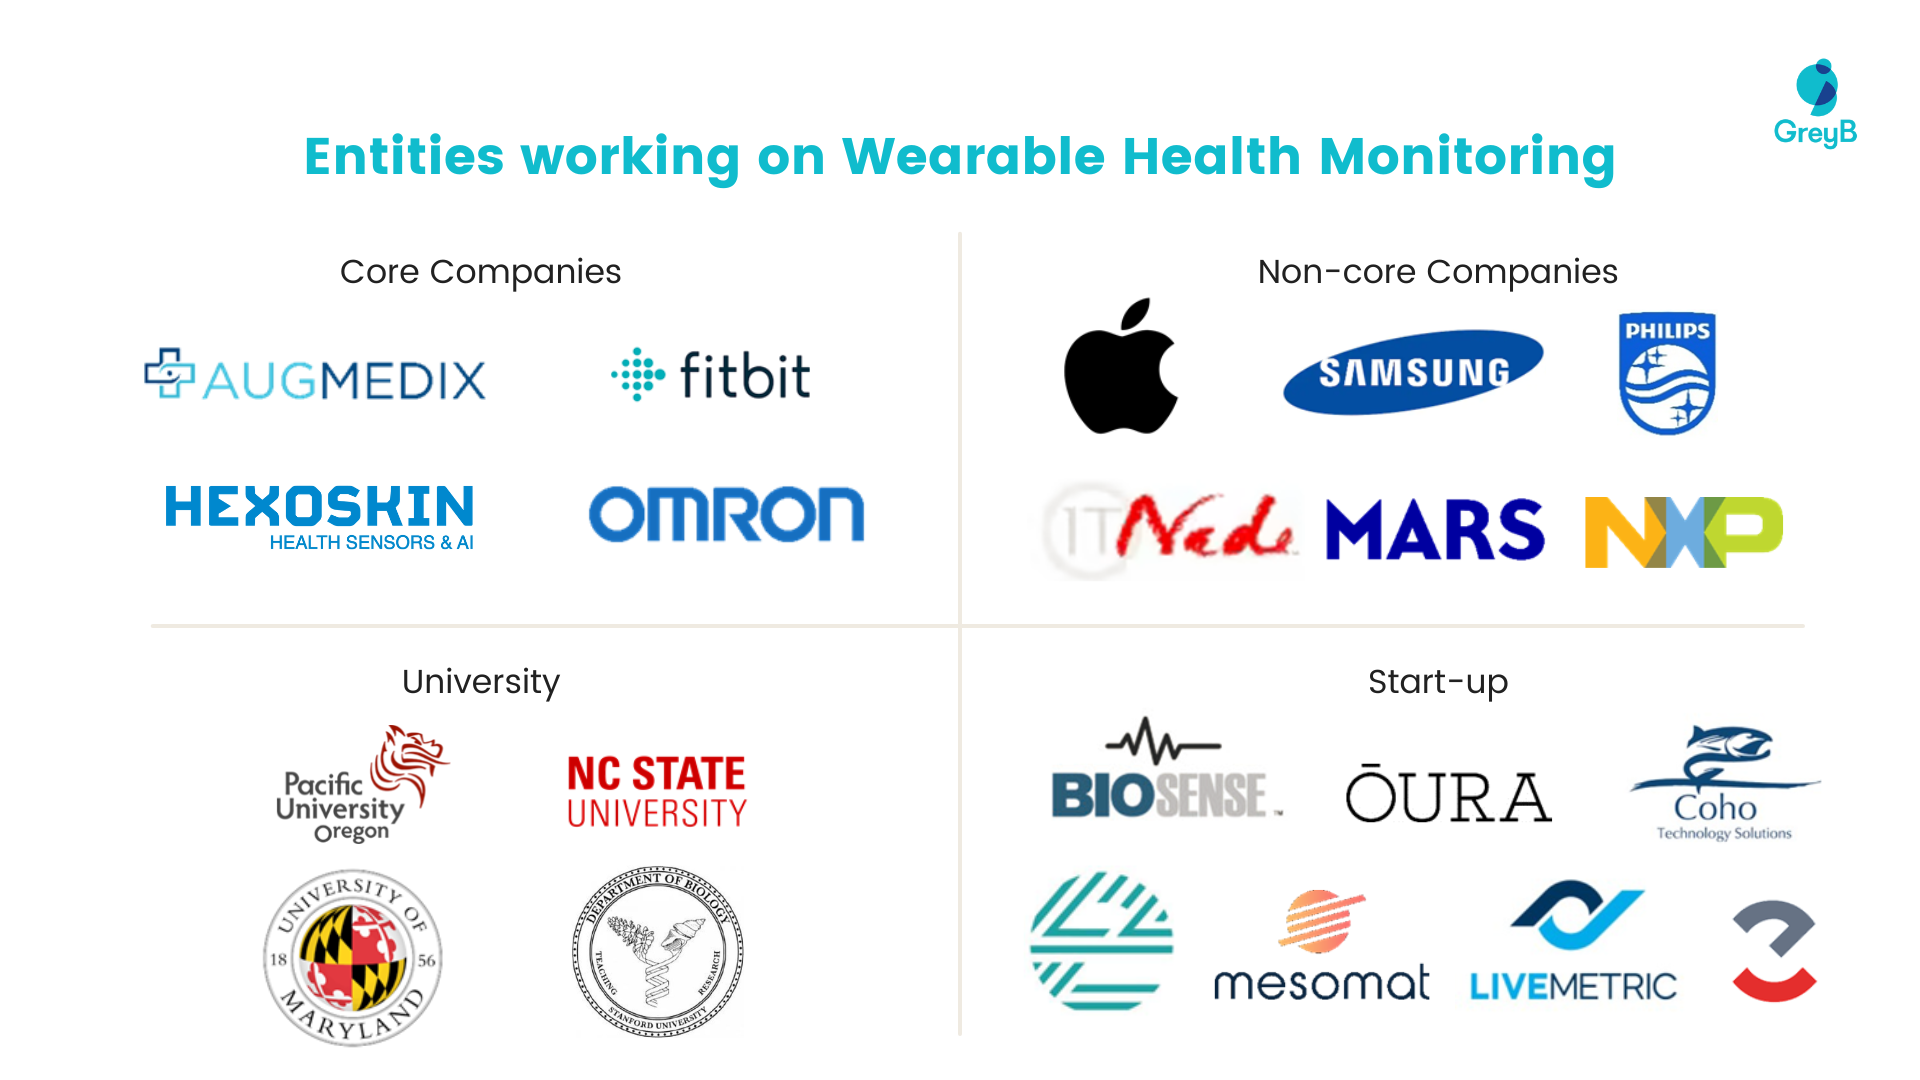 Entities working on Wearable Health Monitoring